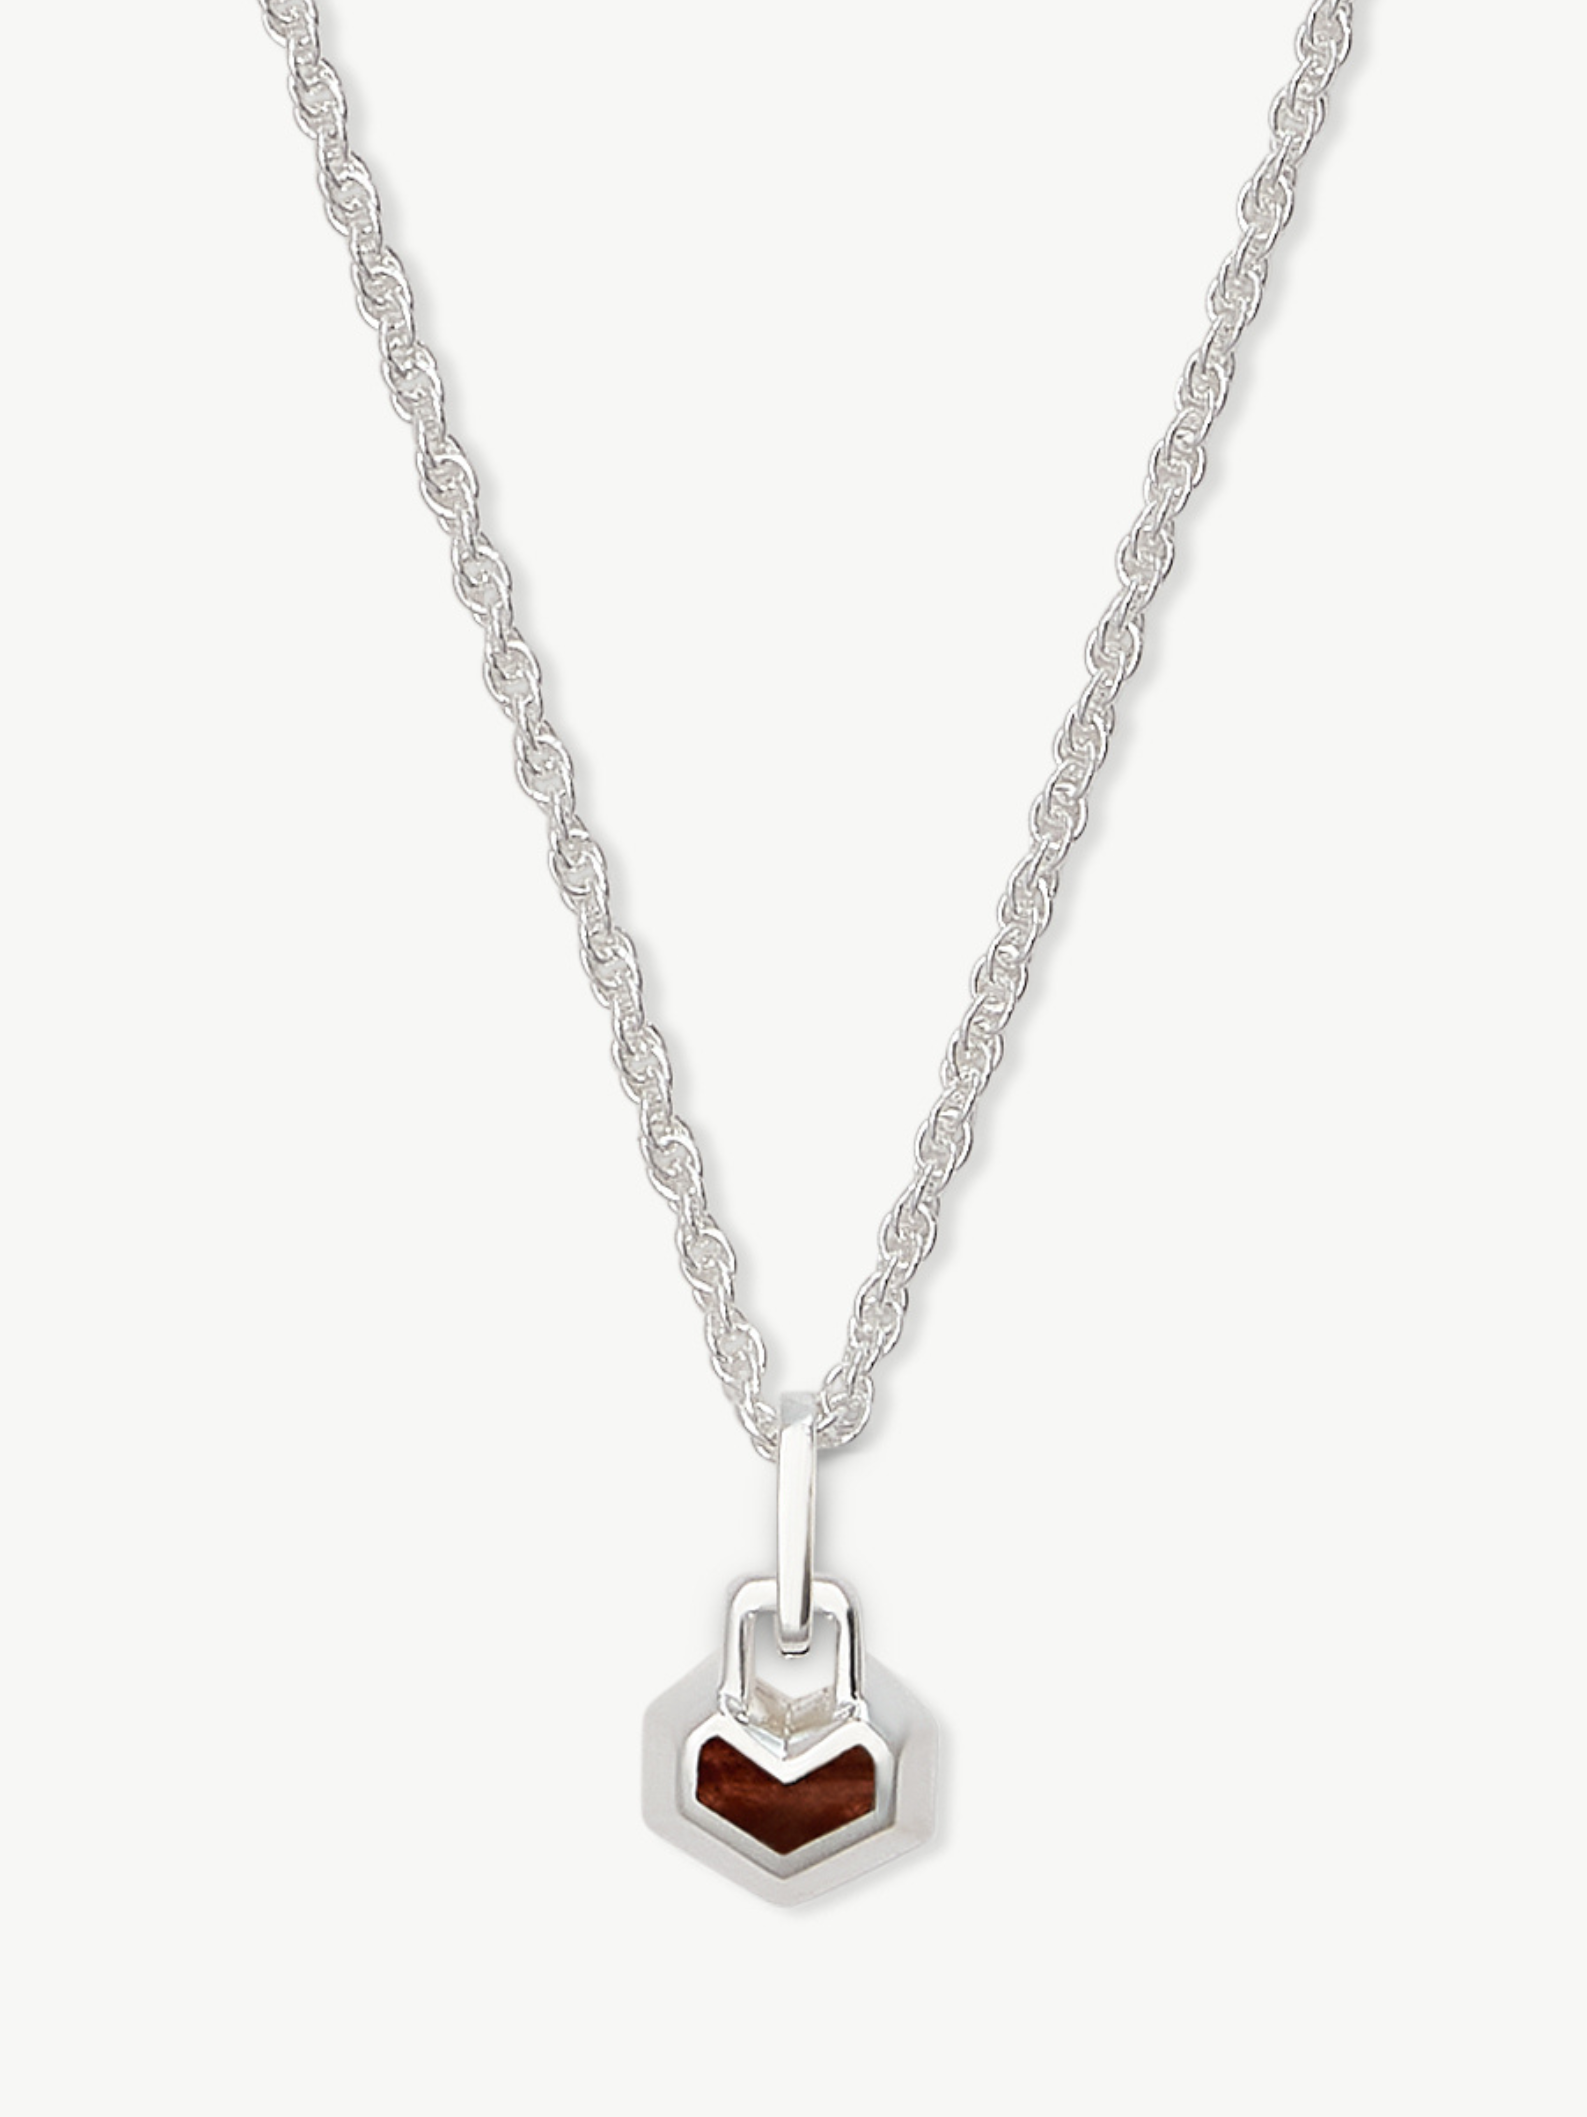 MINI DARYL NECKLACE 16" CHAIN <br> Sterling Silver - Red Tiger Eye